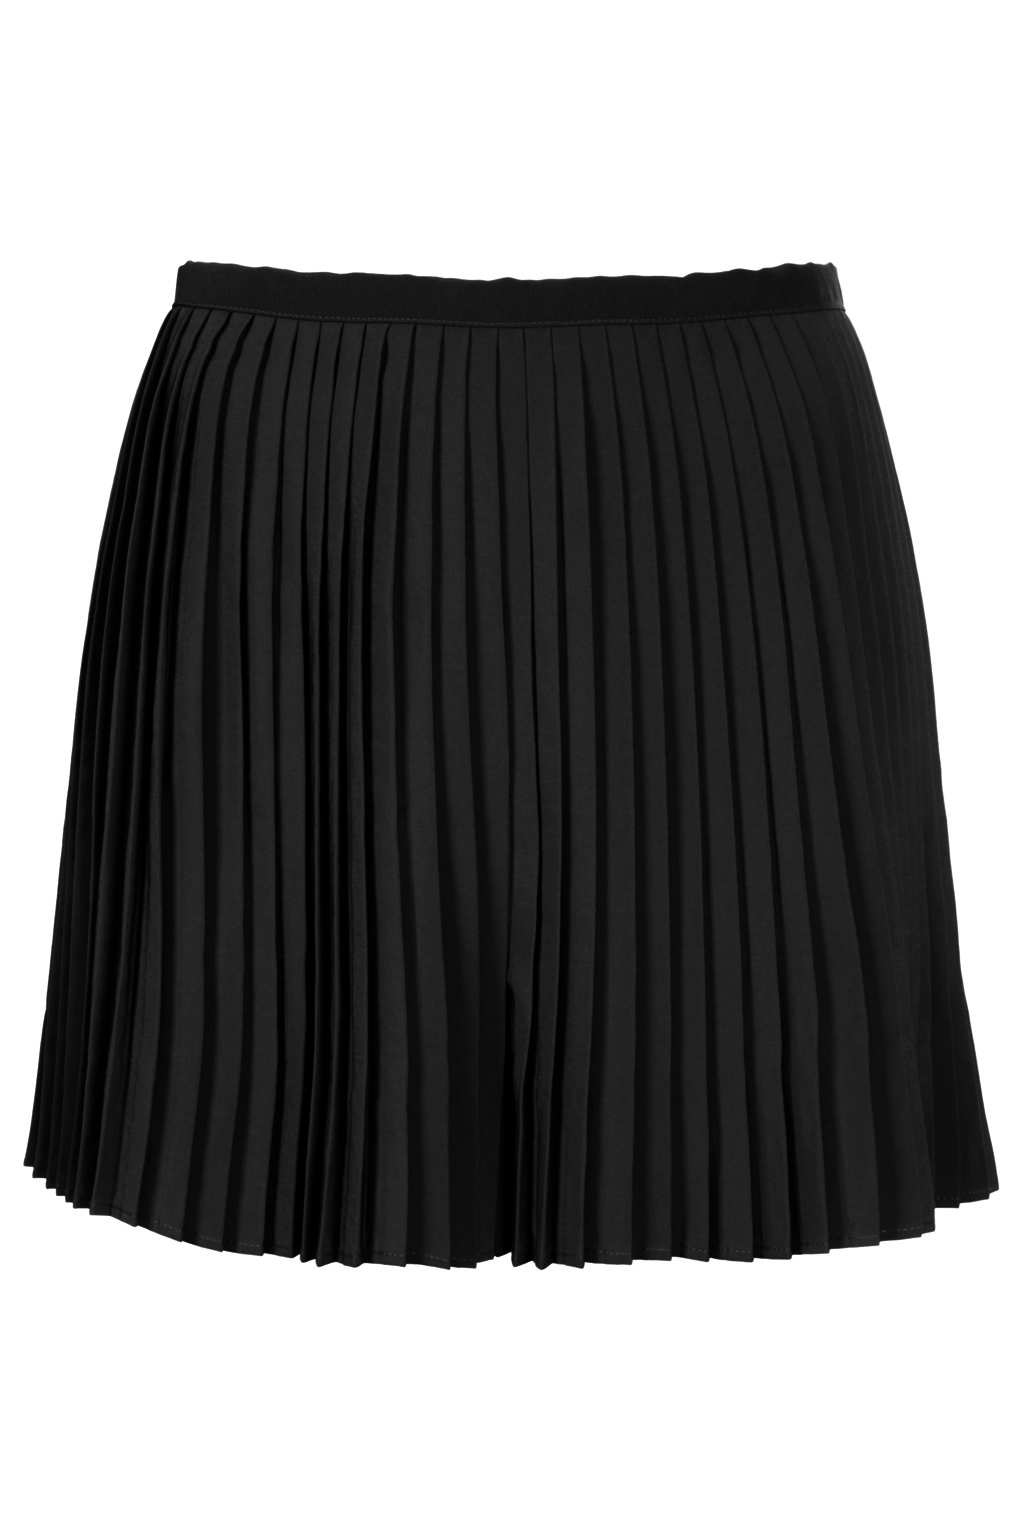 Lyst - Topshop Black Pleated Shorts in Black